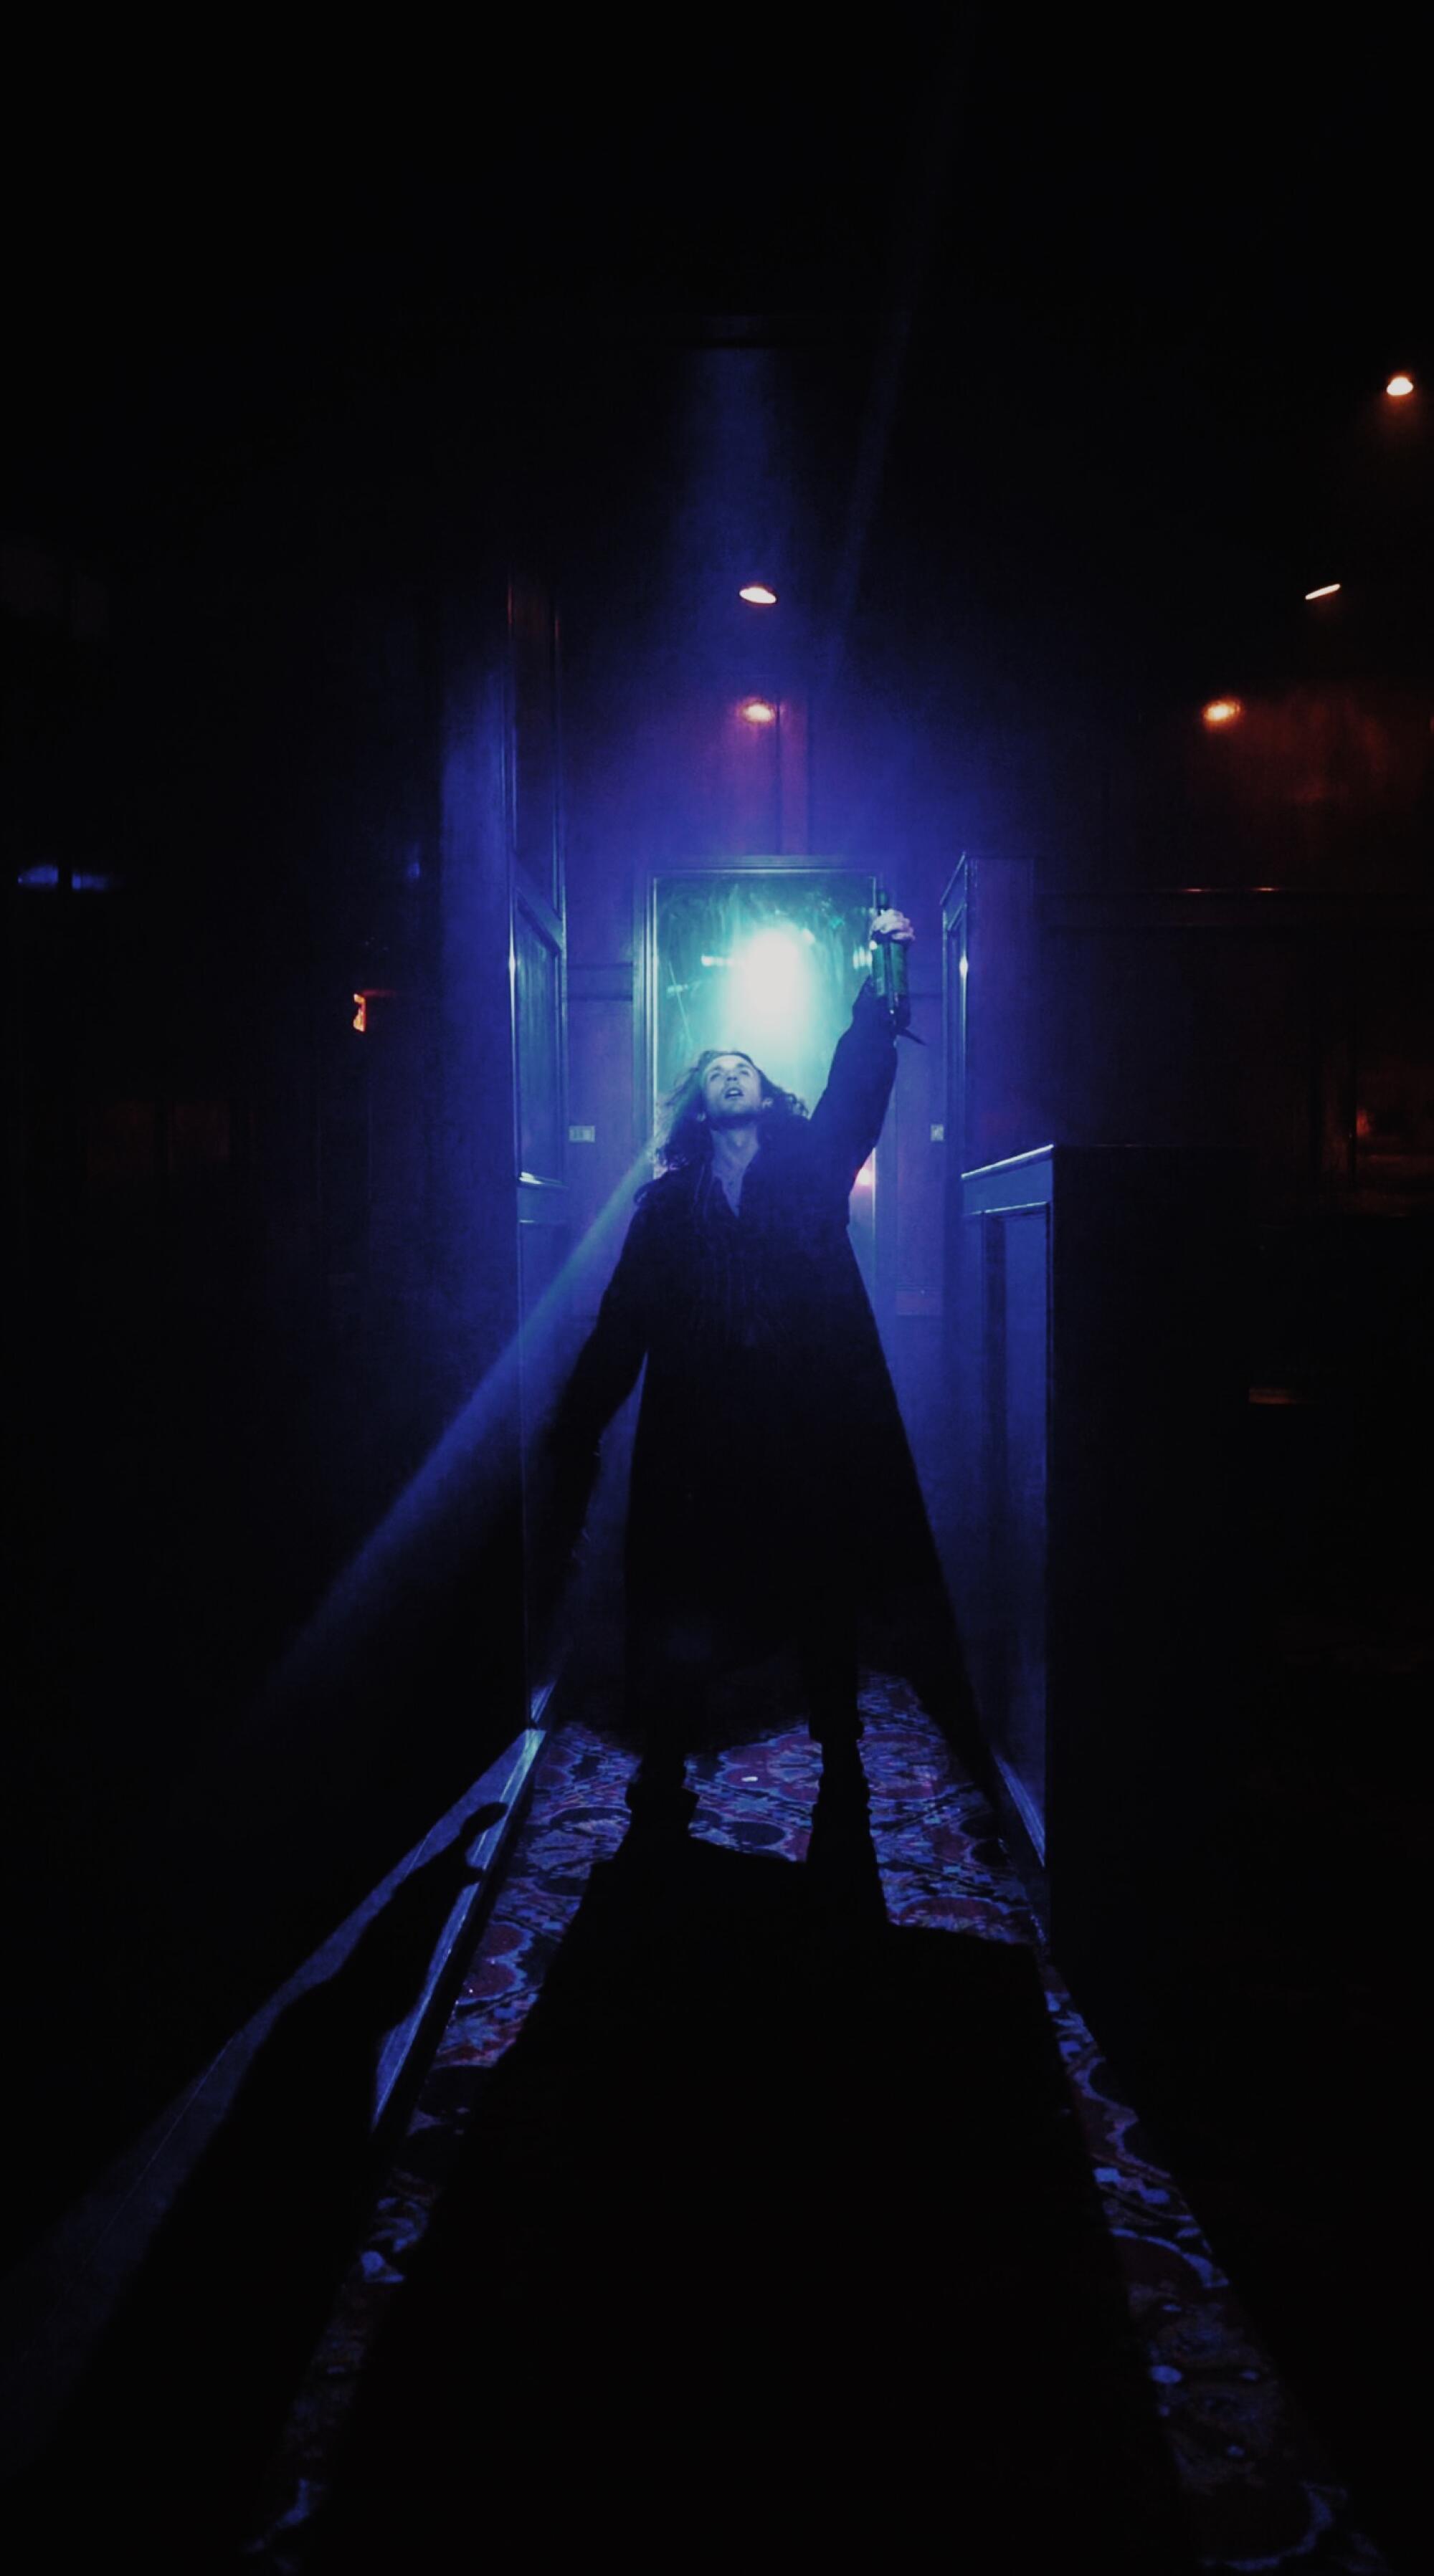 A figure in a long, dark coat stands in a dimly lighted hallway.